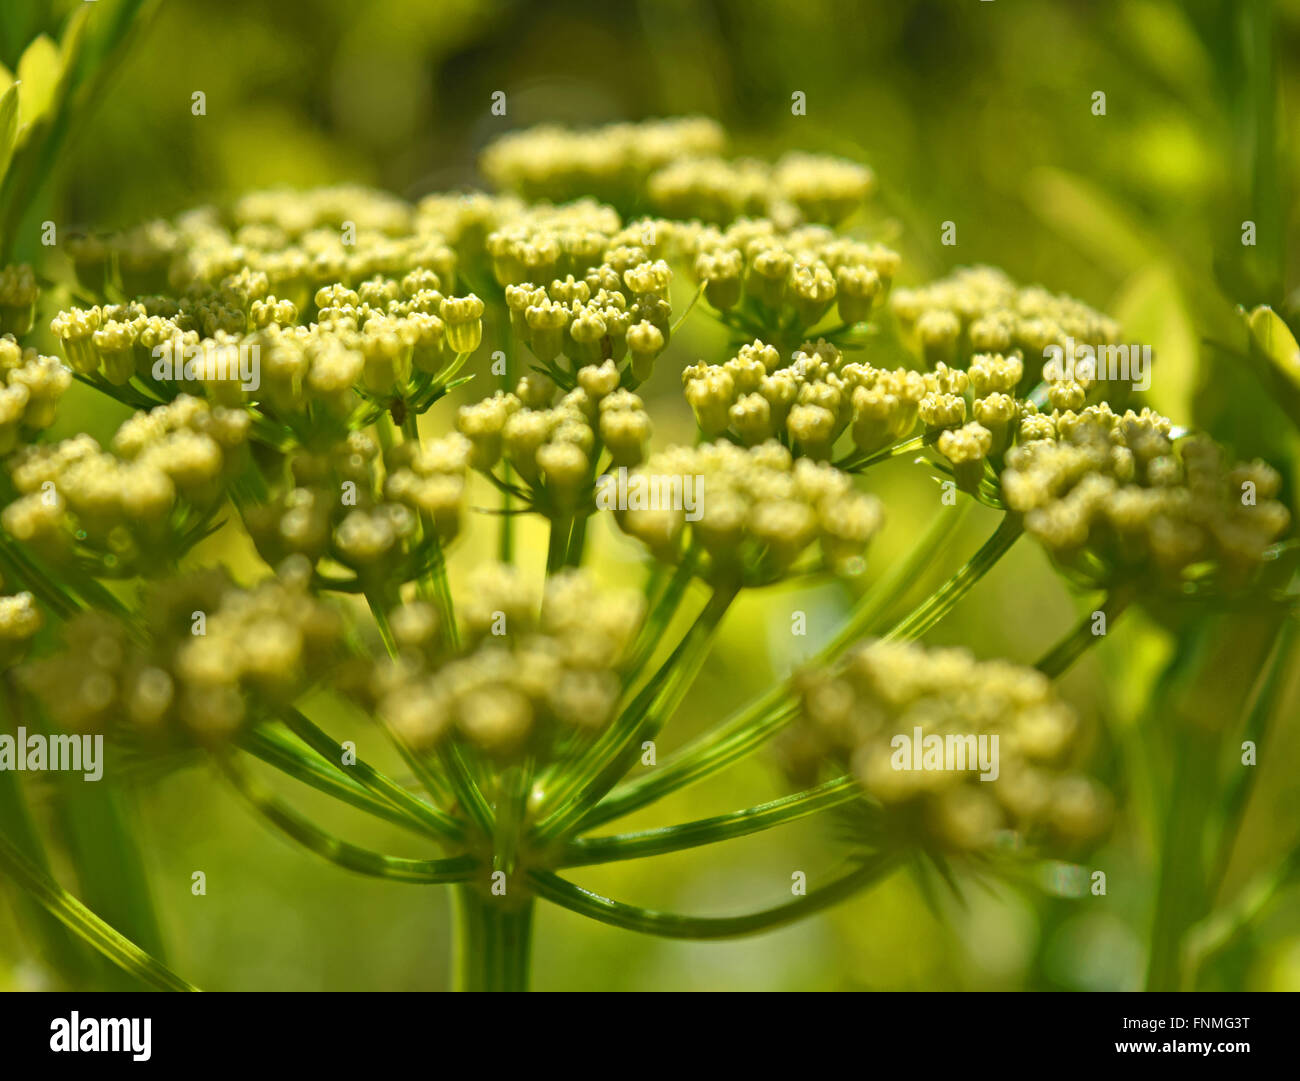 Flowering parsley plant close-up Stock Photo